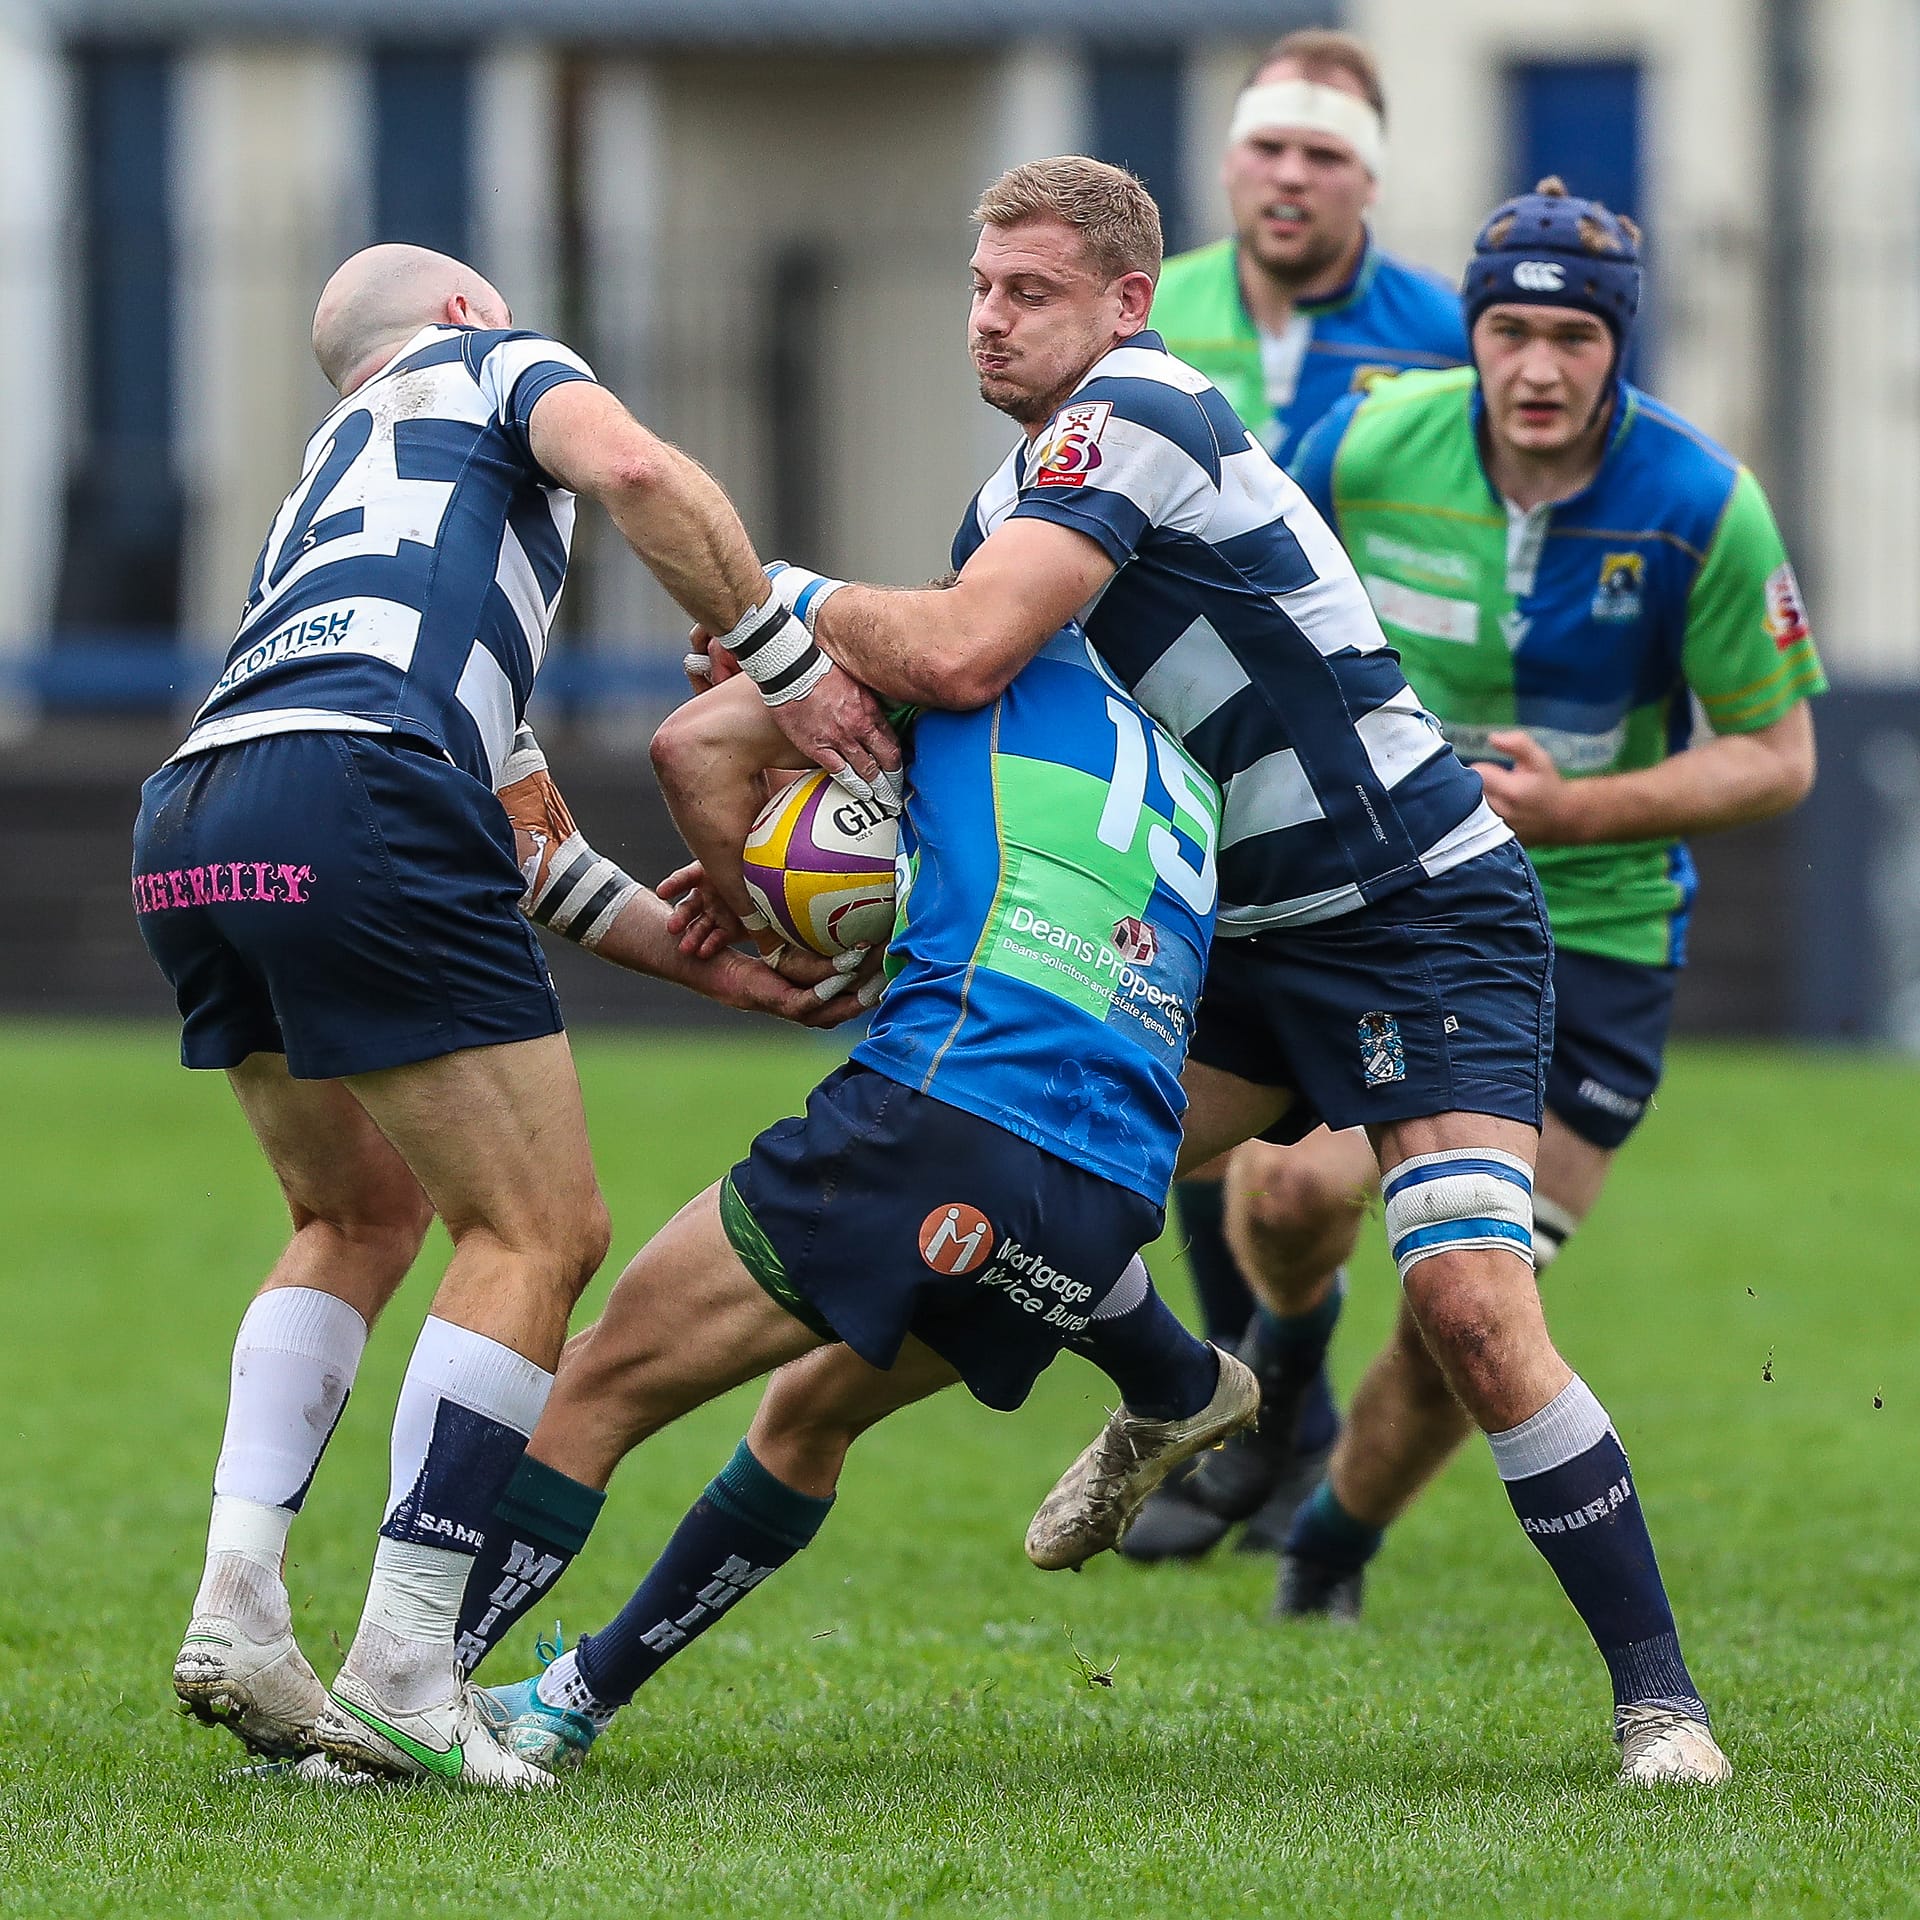 Heriots Jason Hill and Iain Wilson tackle Boroughmuirs Tom Brown during the FOSROC Super 6 match between Heriot's Rugby and Boroughmuir Bears at Goldenacre, Edinburgh on 09/10/2021. 

(Photo: 39 Design Photography)